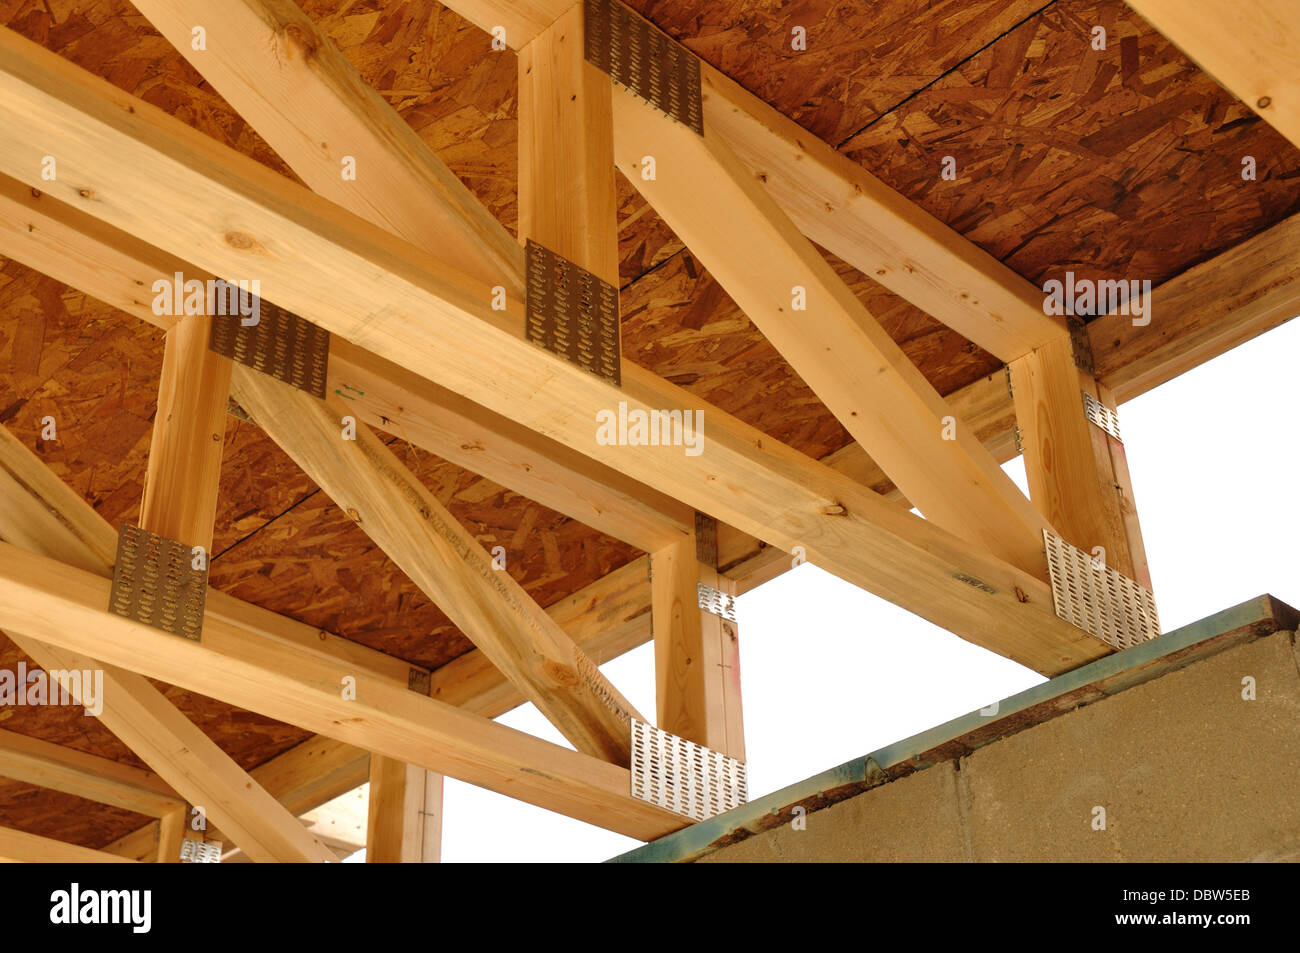 Floor Ceiling Joists Trusses In A New House Under Construction Stock Photo Alamy